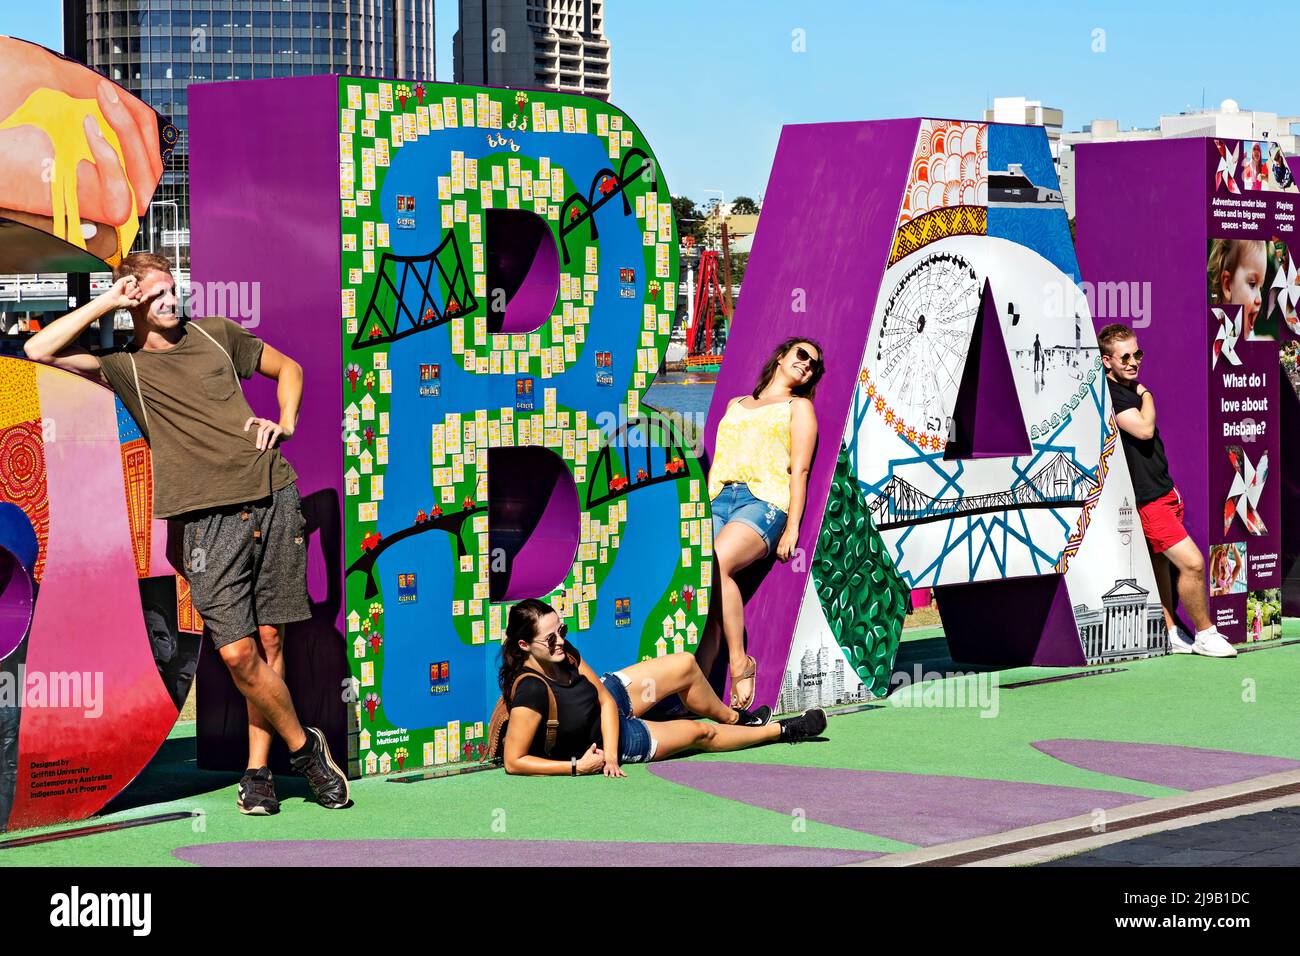 File:The Brisbane sign in South Bank Parklands pano.jpg - Wikimedia Commons